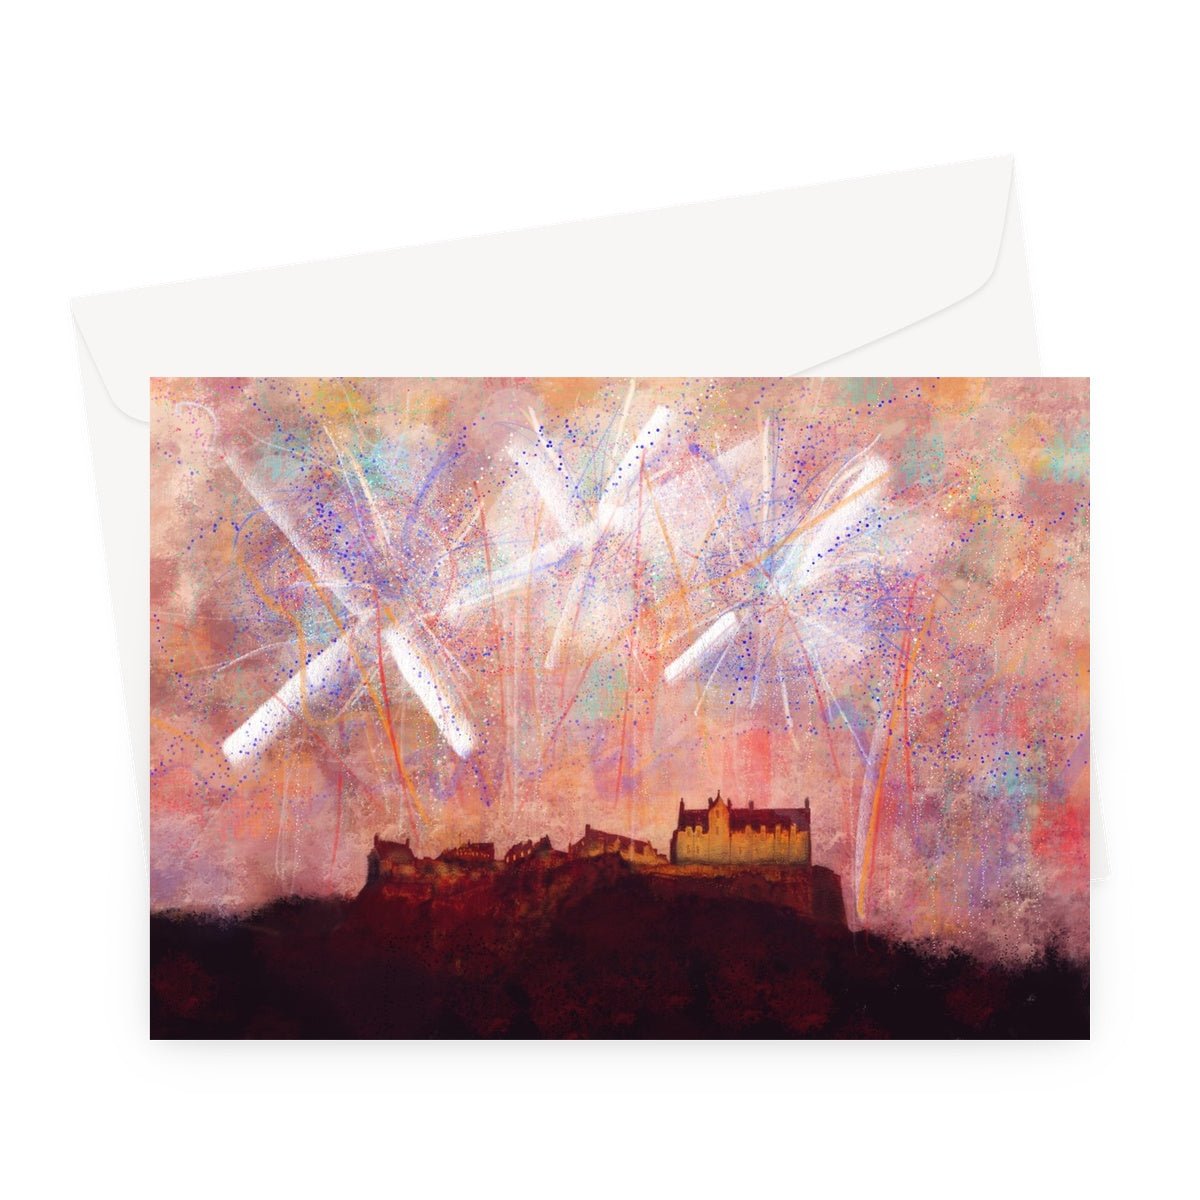 Edinburgh Castle Fireworks Art Gifts Greeting Card-Greetings Cards-Edinburgh & Glasgow Art Gallery-A5 Landscape-10 Cards-Paintings, Prints, Homeware, Art Gifts From Scotland By Scottish Artist Kevin Hunter